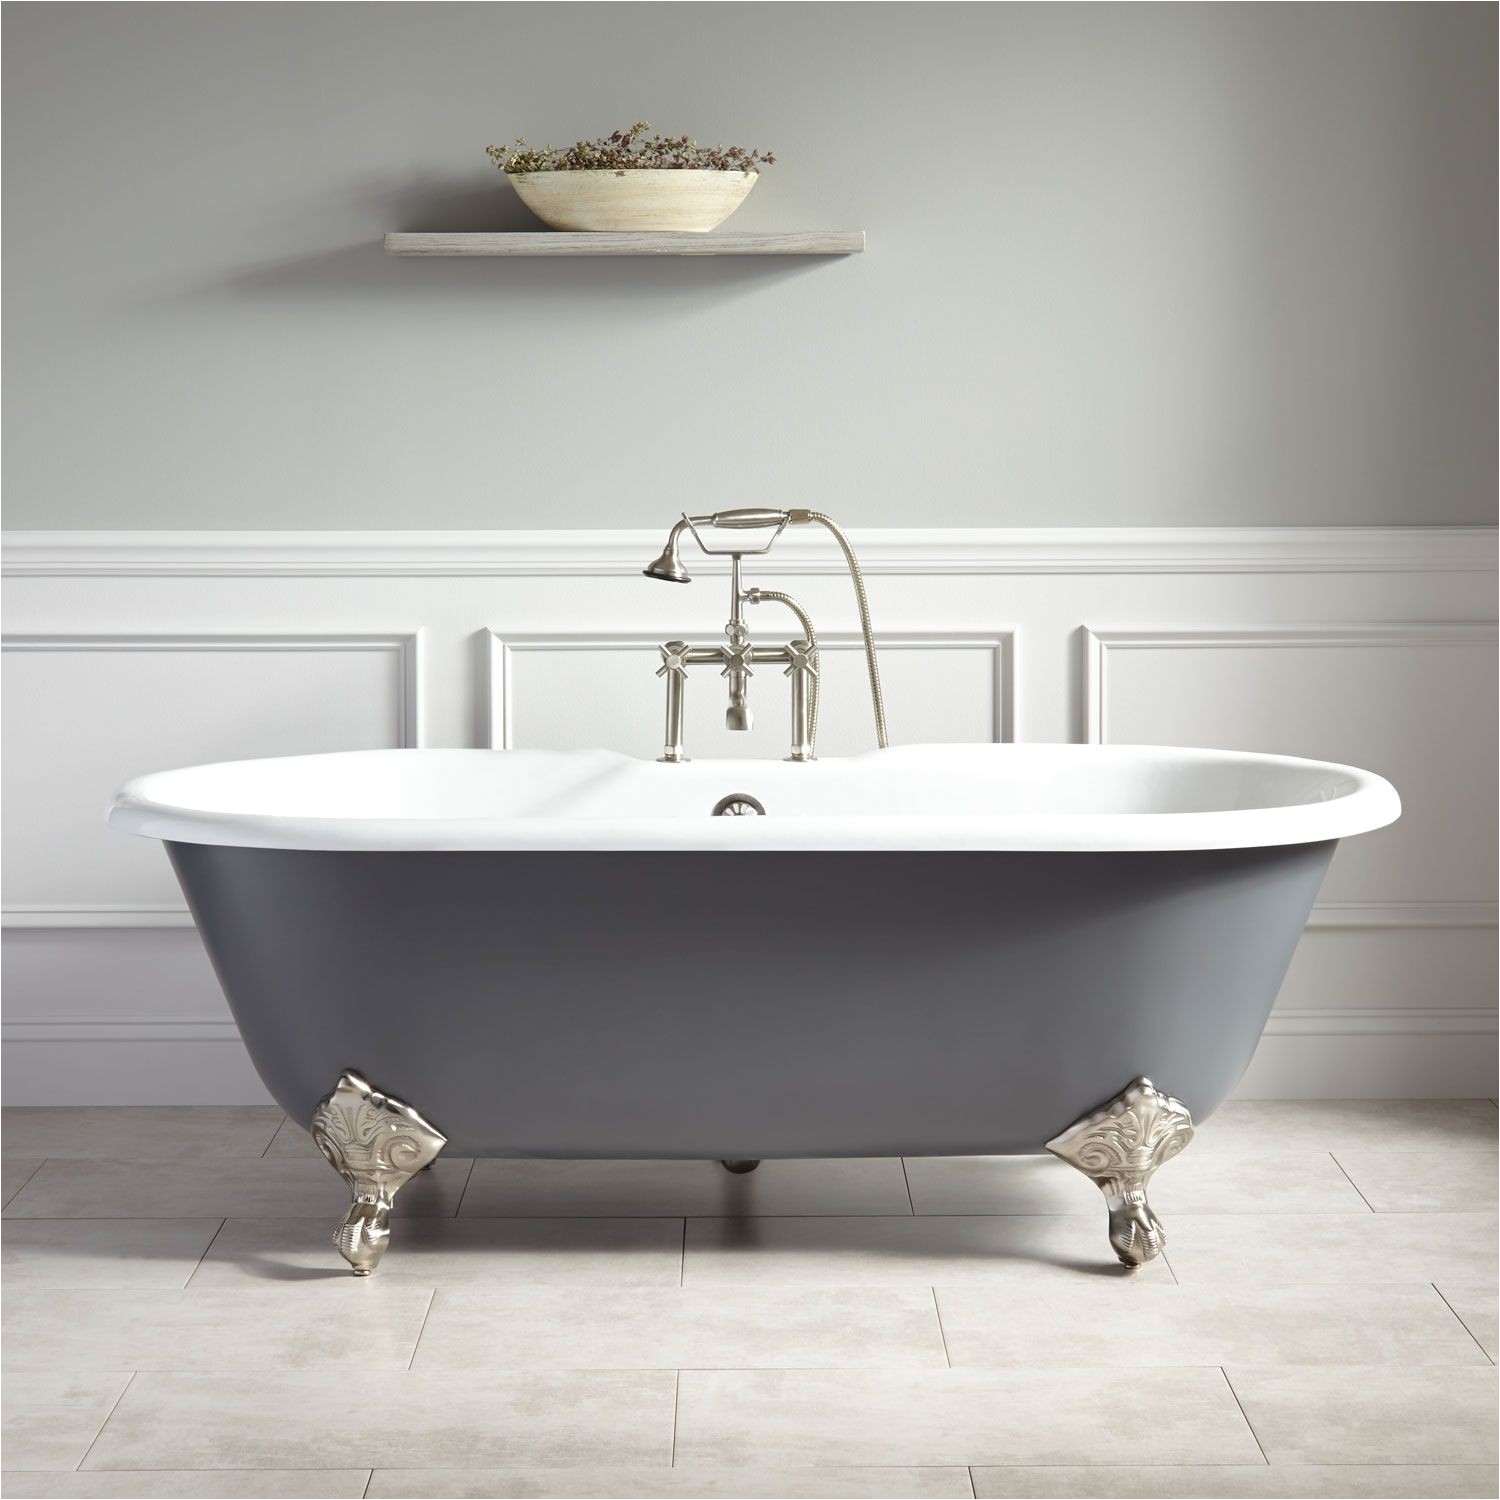 Bathtubs with Doors wholesale Bathtubs Awesome 66 Tub Awesome Mirabella Bathtubs 0d Pics